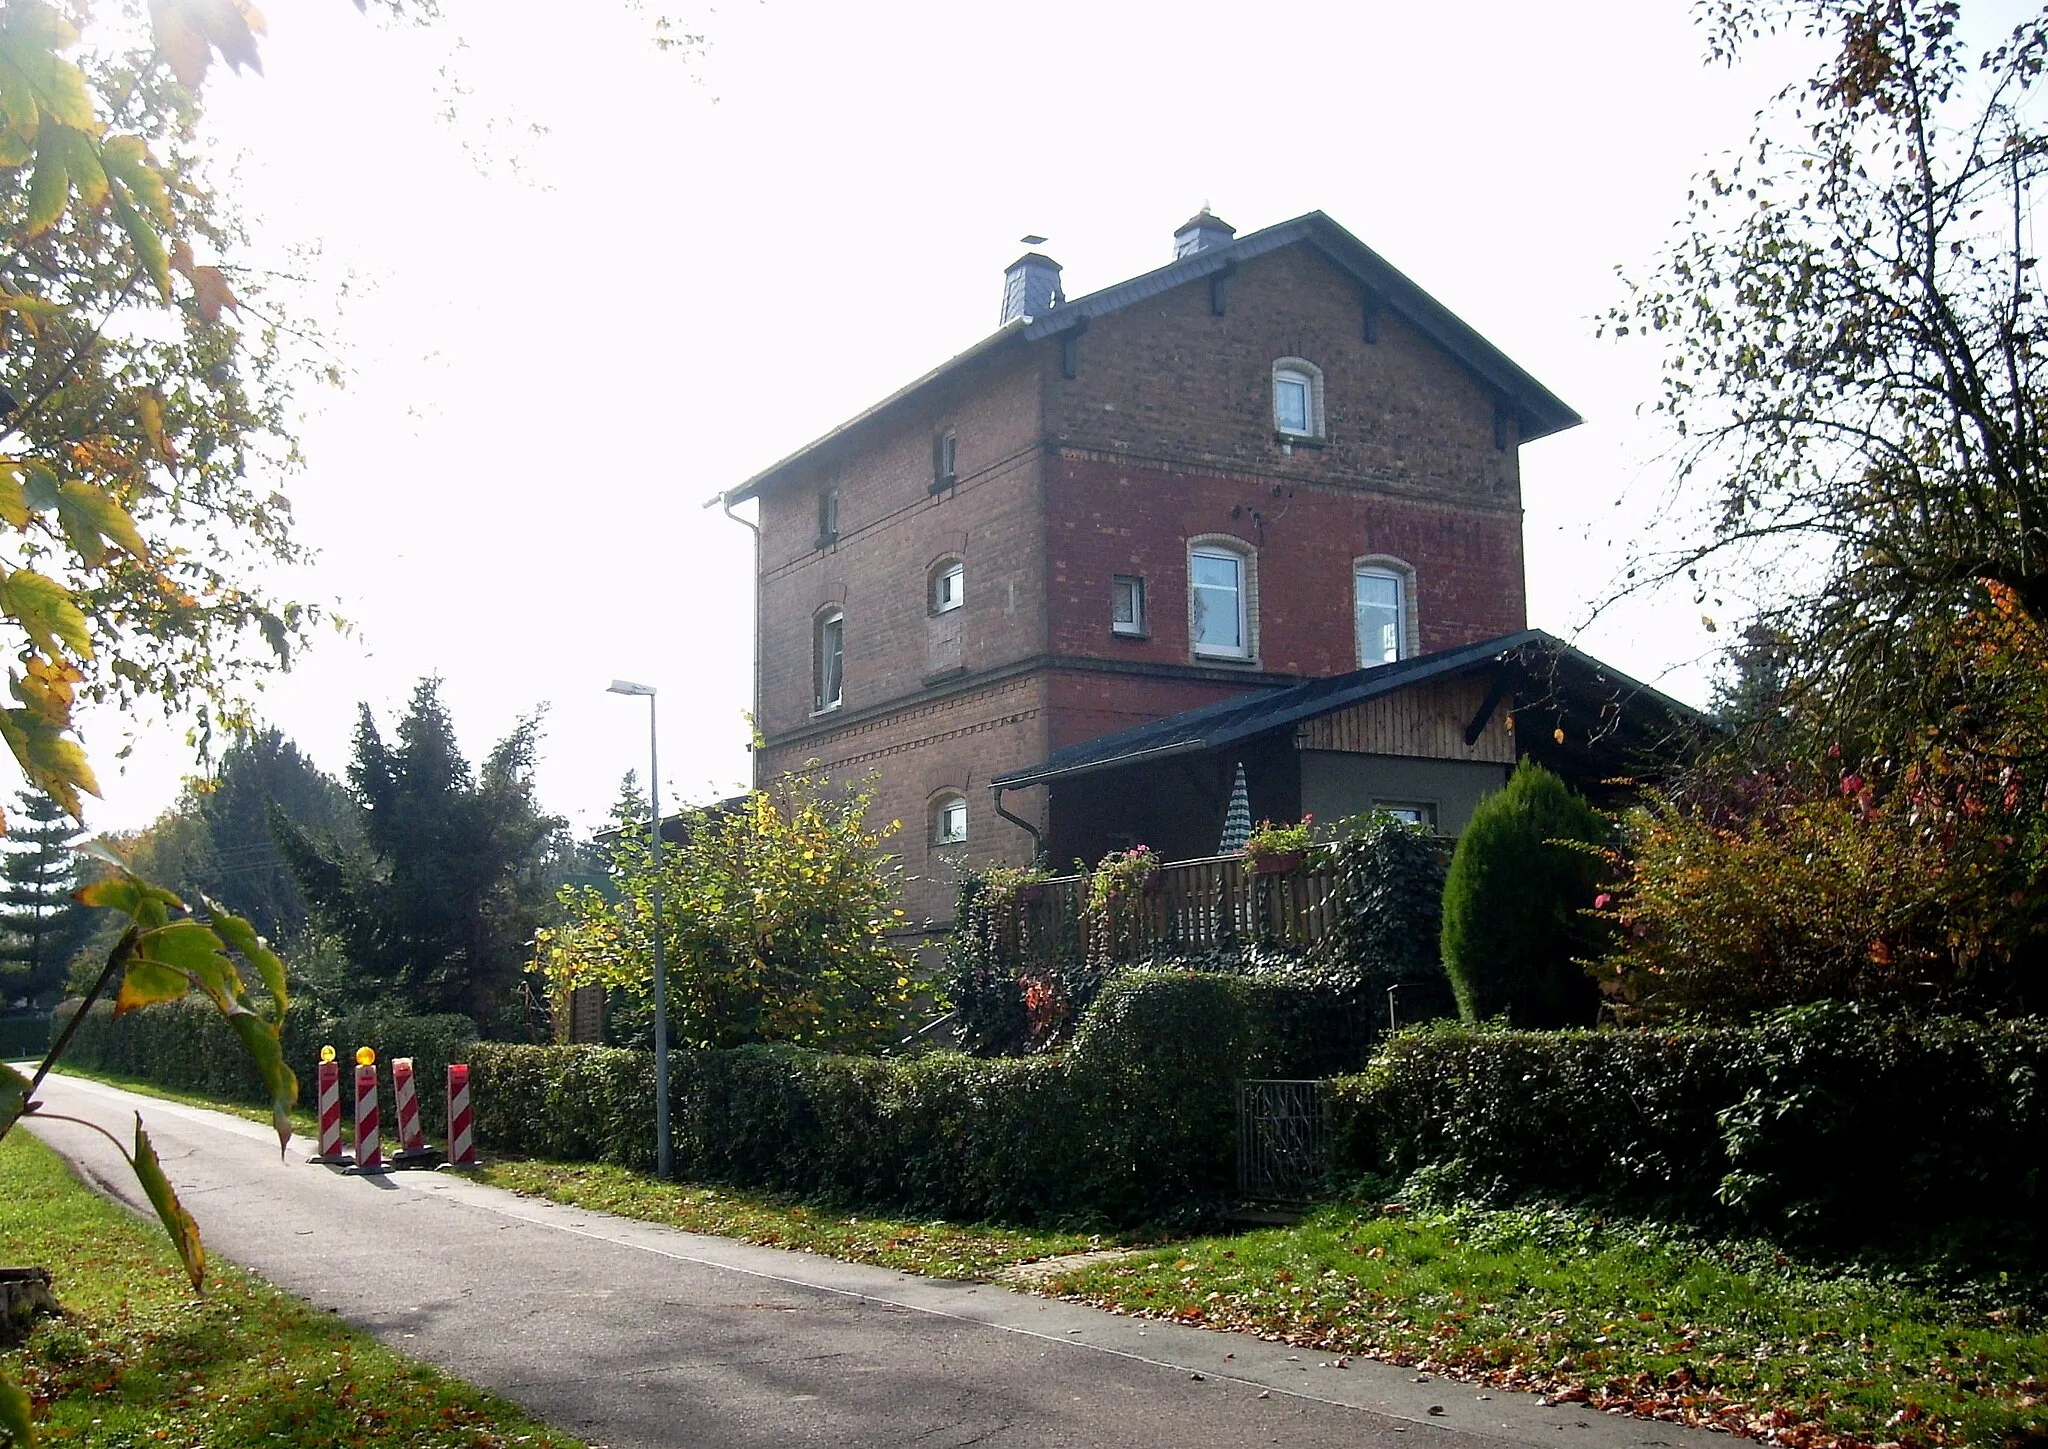 Photo showing: Building of a train station in Kostitz (Starkenberg, district of Altenburger Land, Thuringia) at the former Meuselwitz - Ronneburg railway line